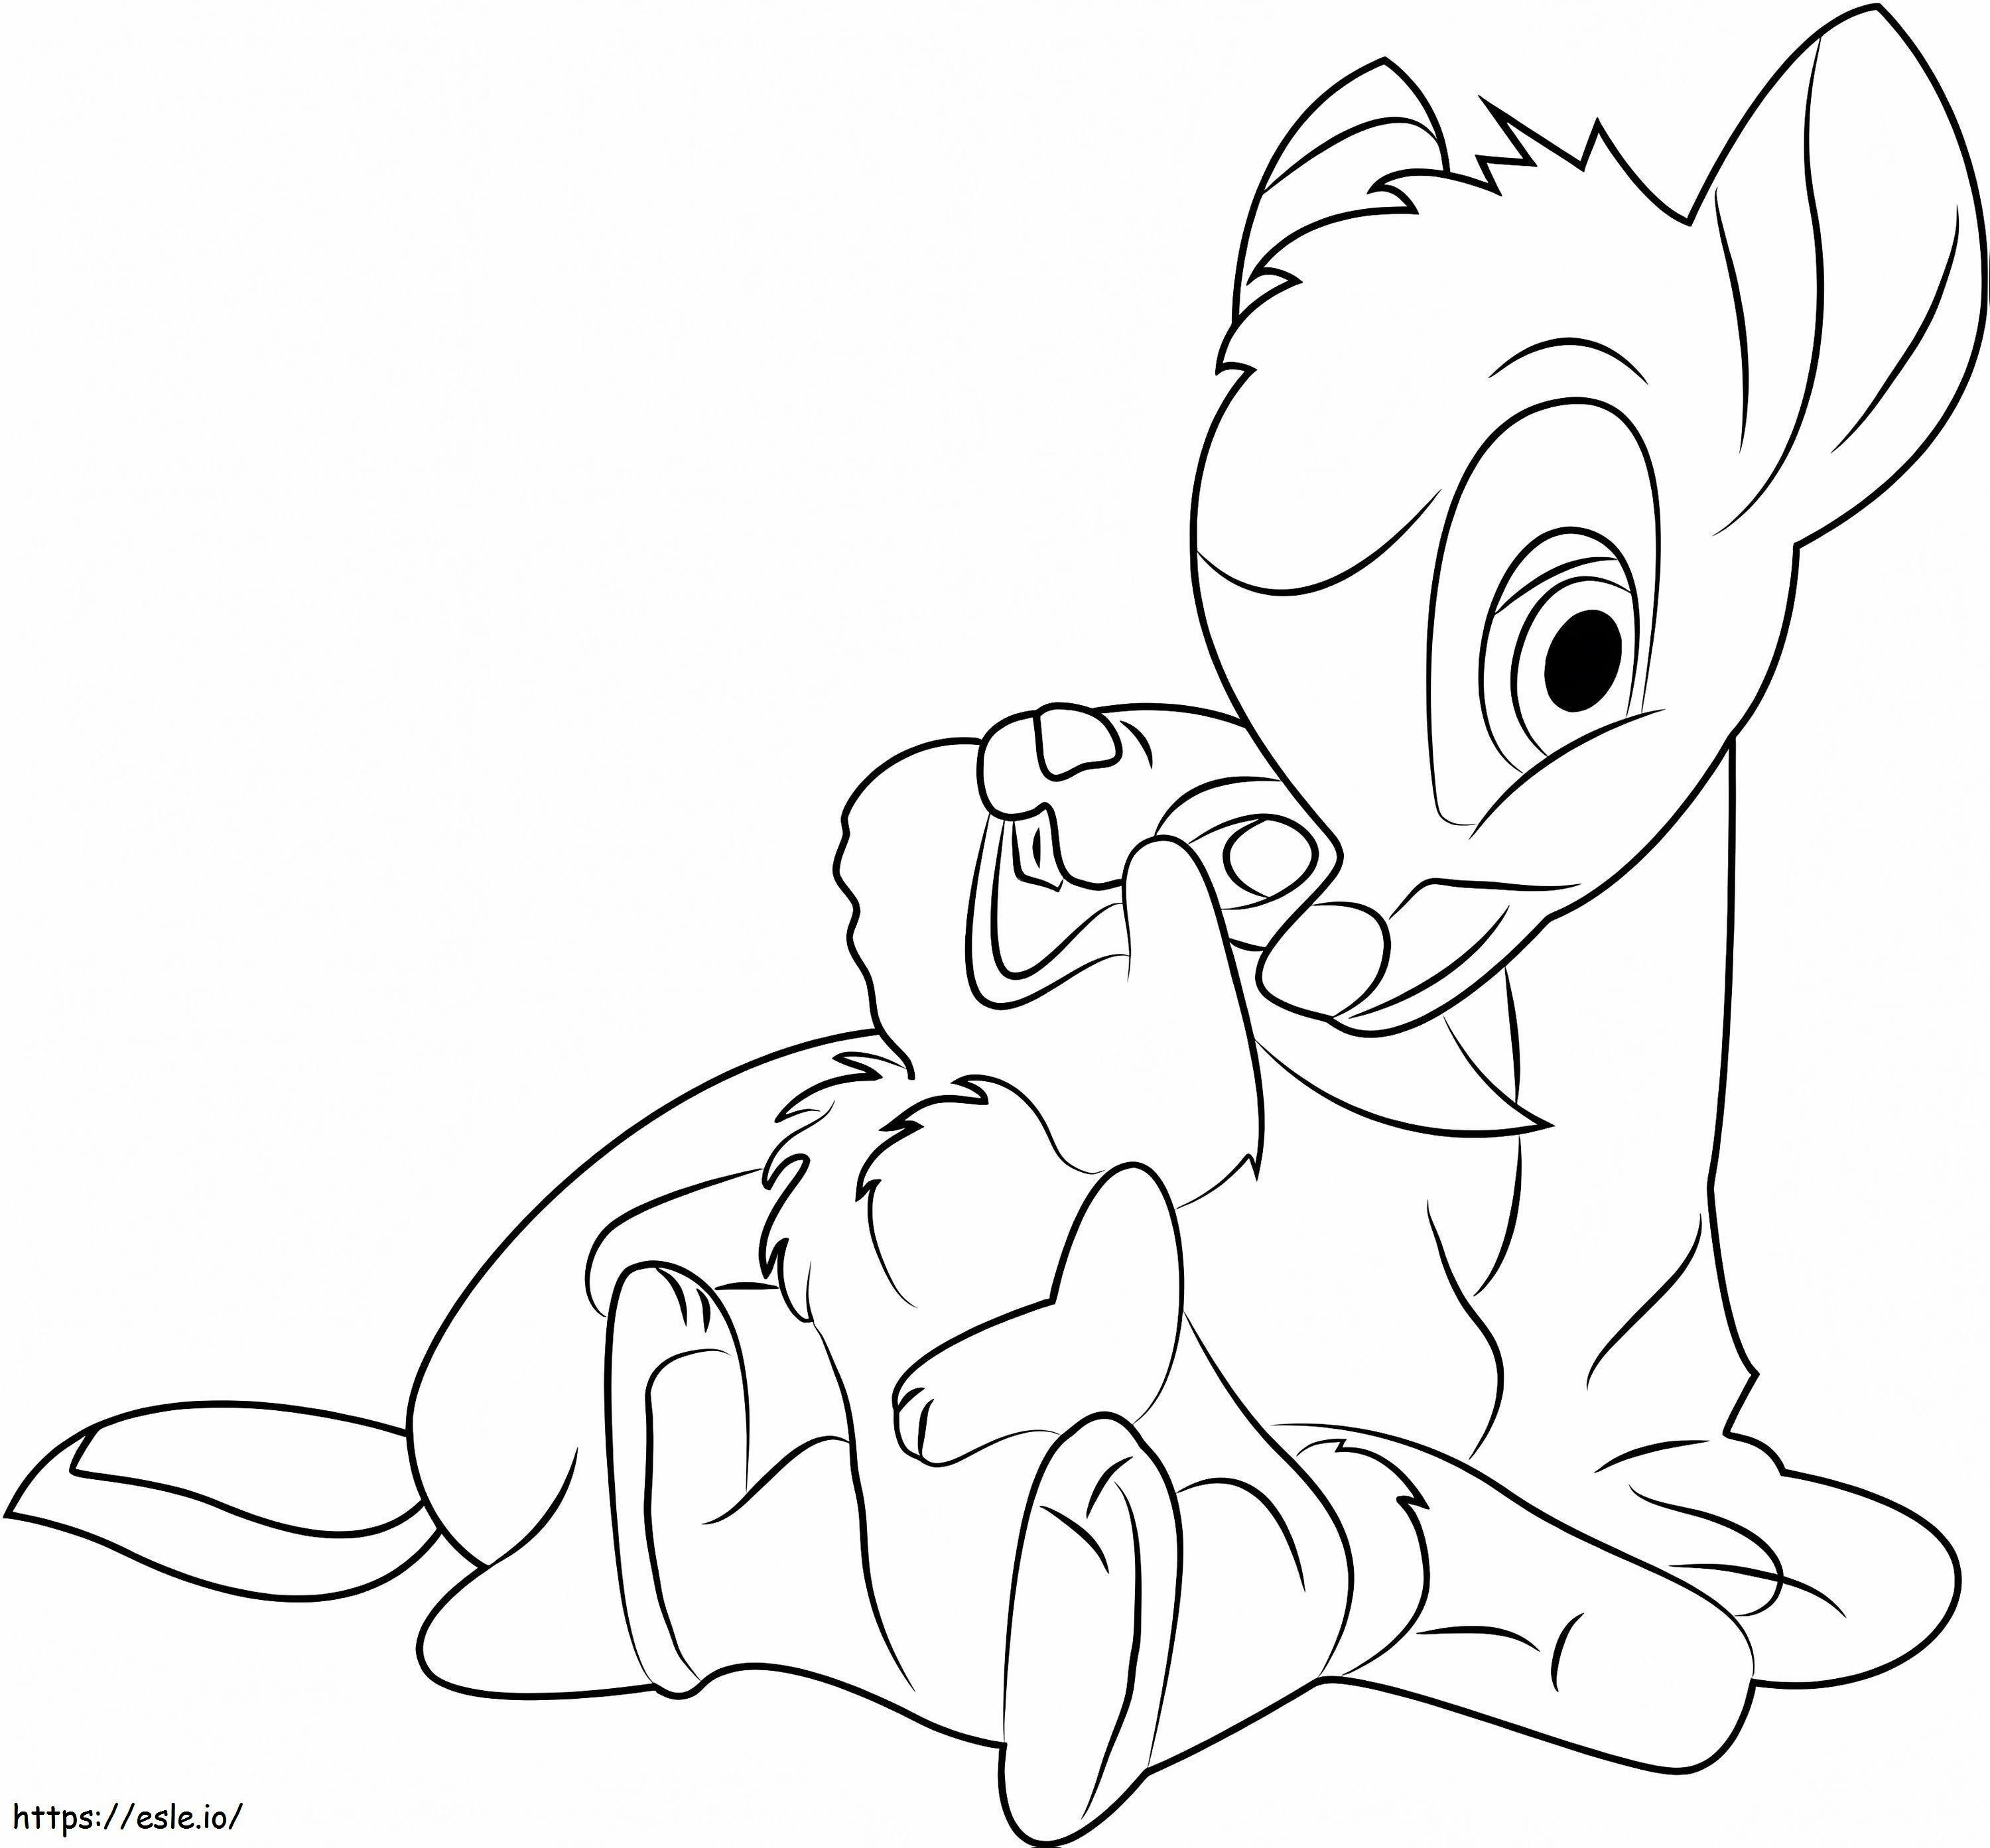 Bambi Y Thumper coloring page